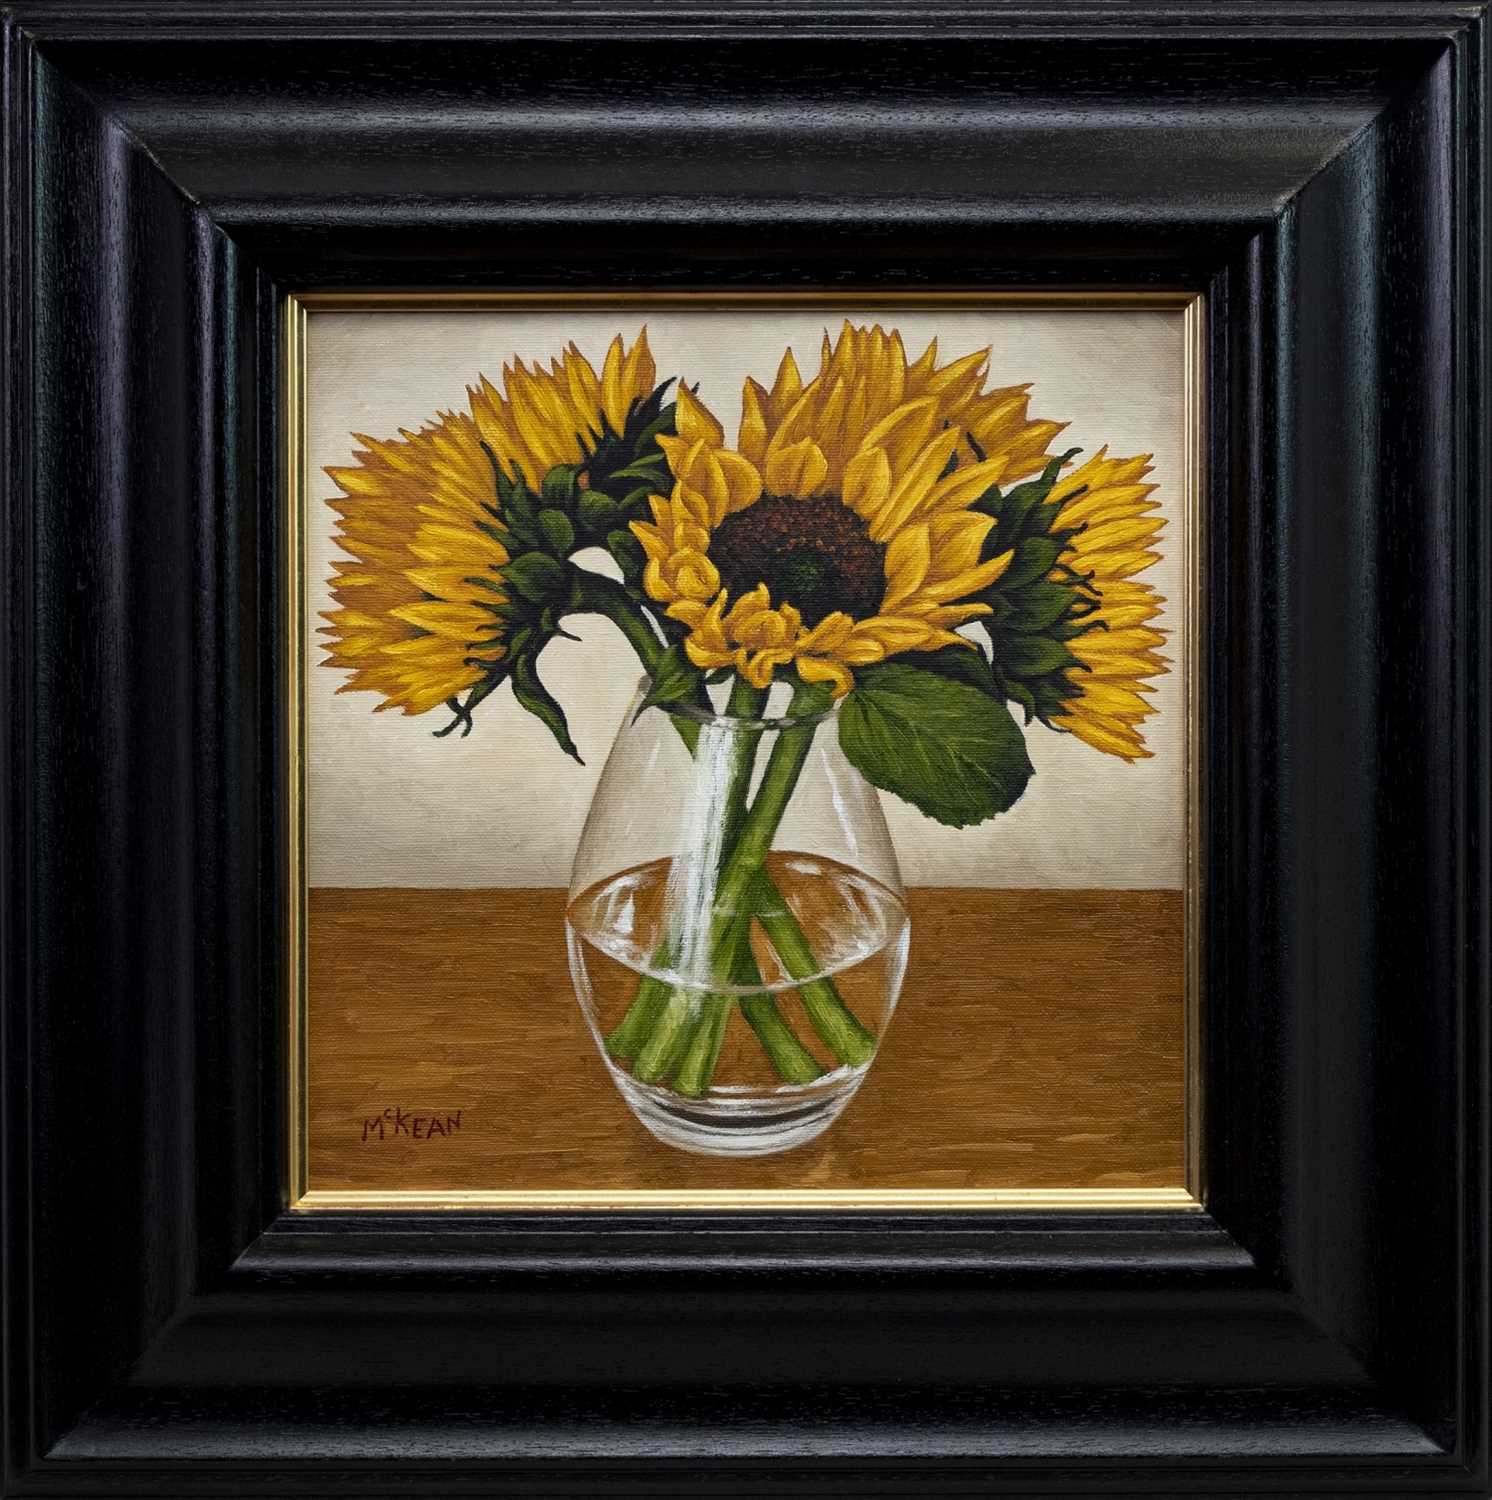 Lot 576 - SUNFLOWERS IN A GLASS VASE, AN OIL BY GRAHAM MCKEAN